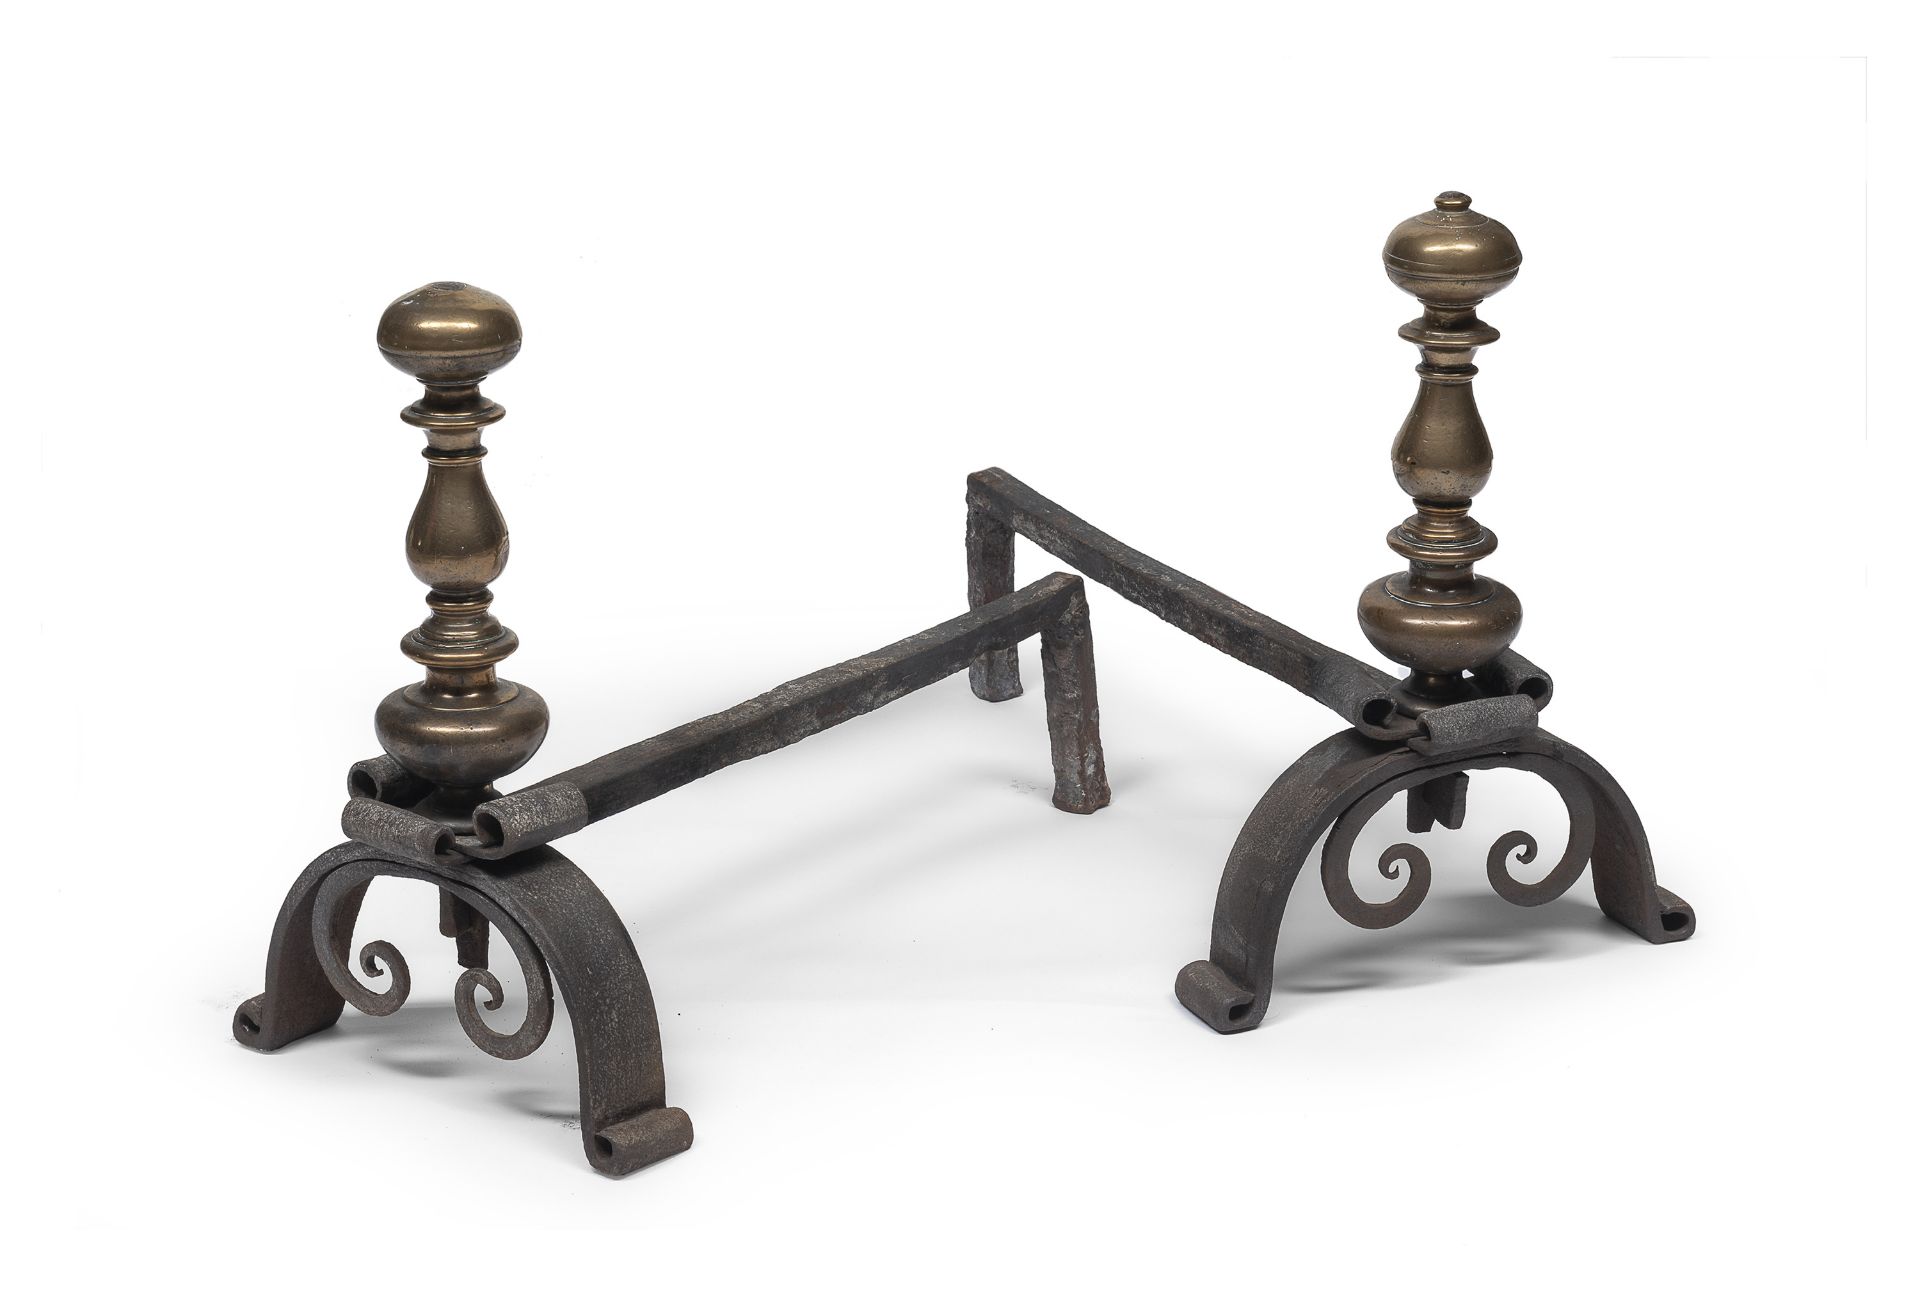 PAIR OF IRON FIREDOGS END OF THE 18TH CENTURY